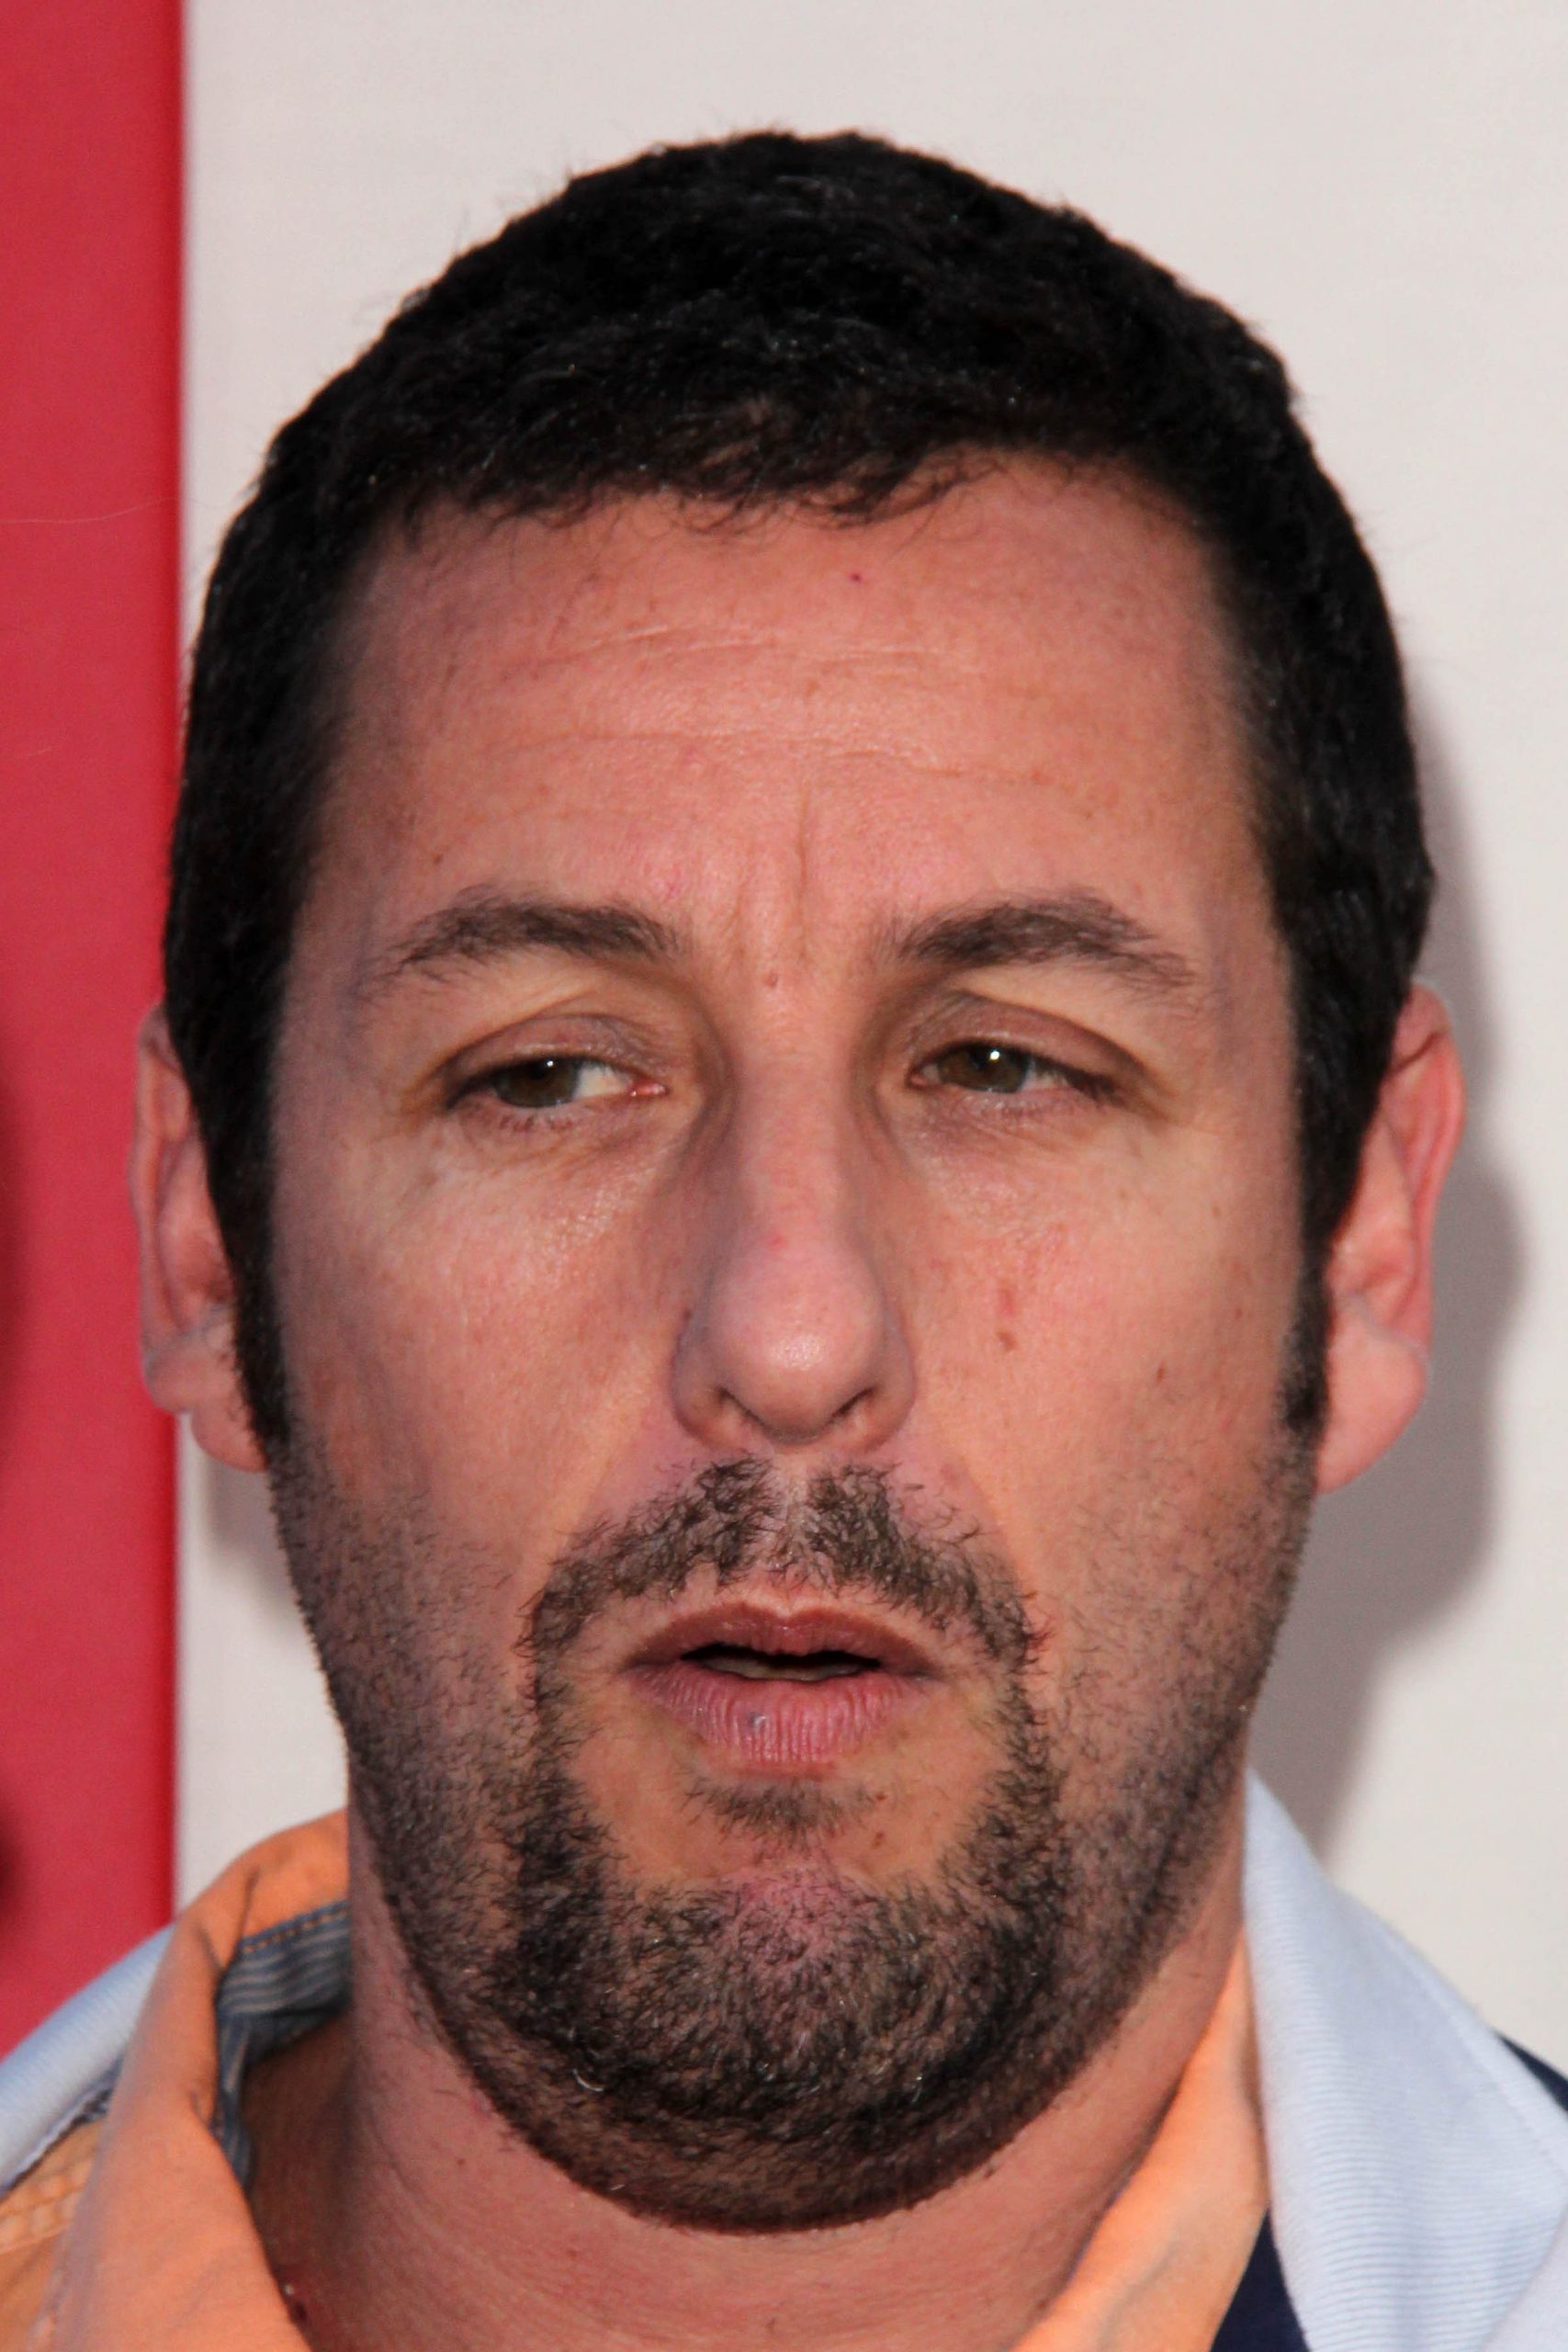 Netflix Signs Deal With Adam Sandler Streaming Service To Get 4 Exclusive Films